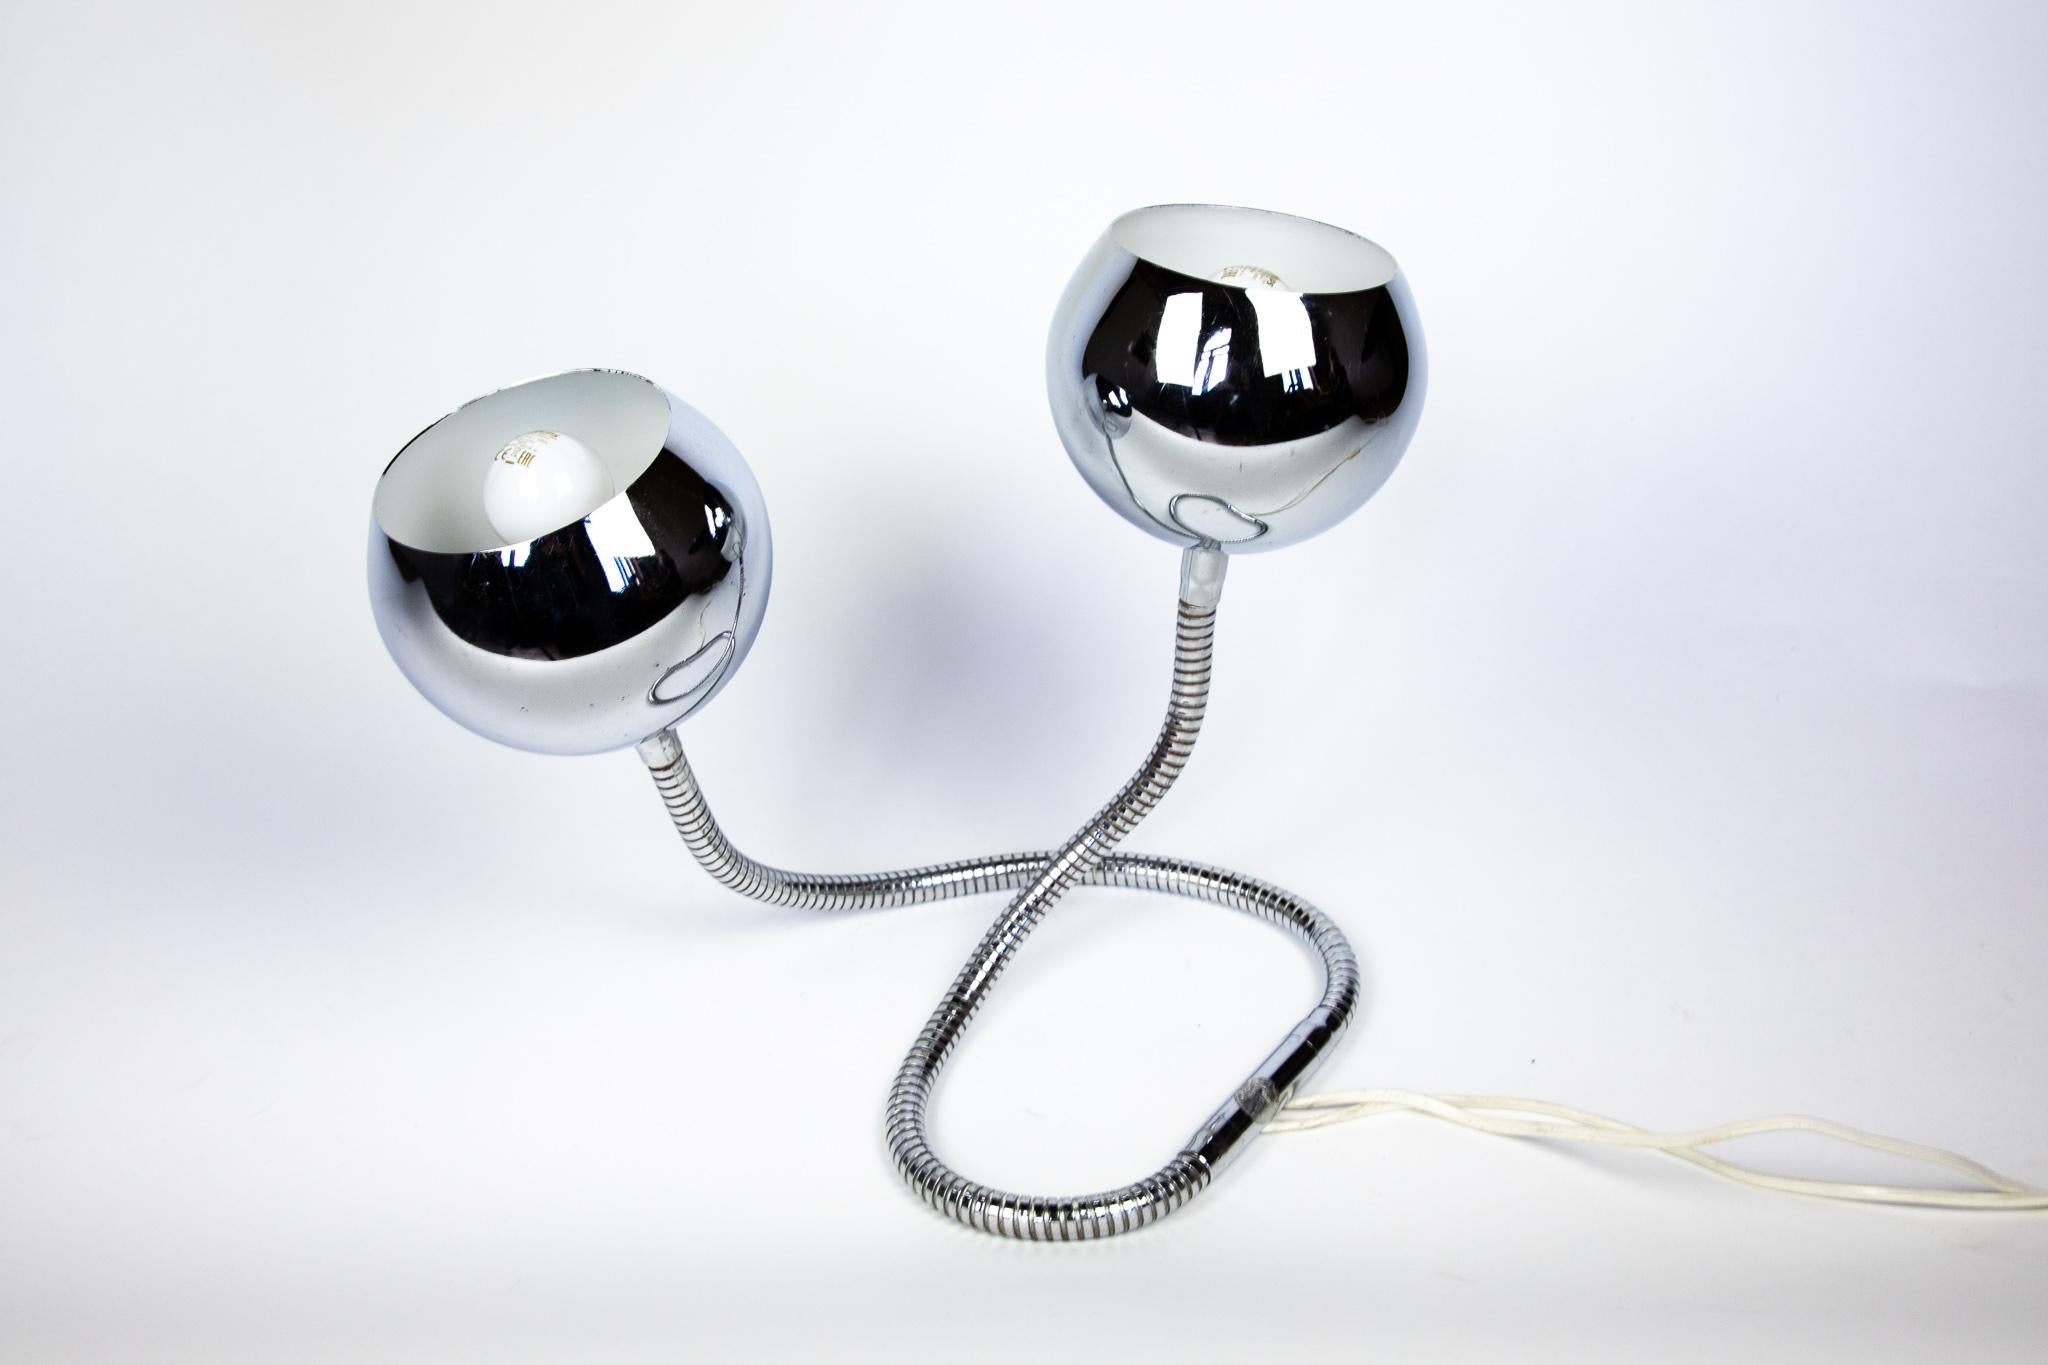 Space Age Table Lamp Serpente by Goiffredo Reggiani, Chrome, Italy 1970s.

This rare Italian mid-century chrome table lamp, named after 